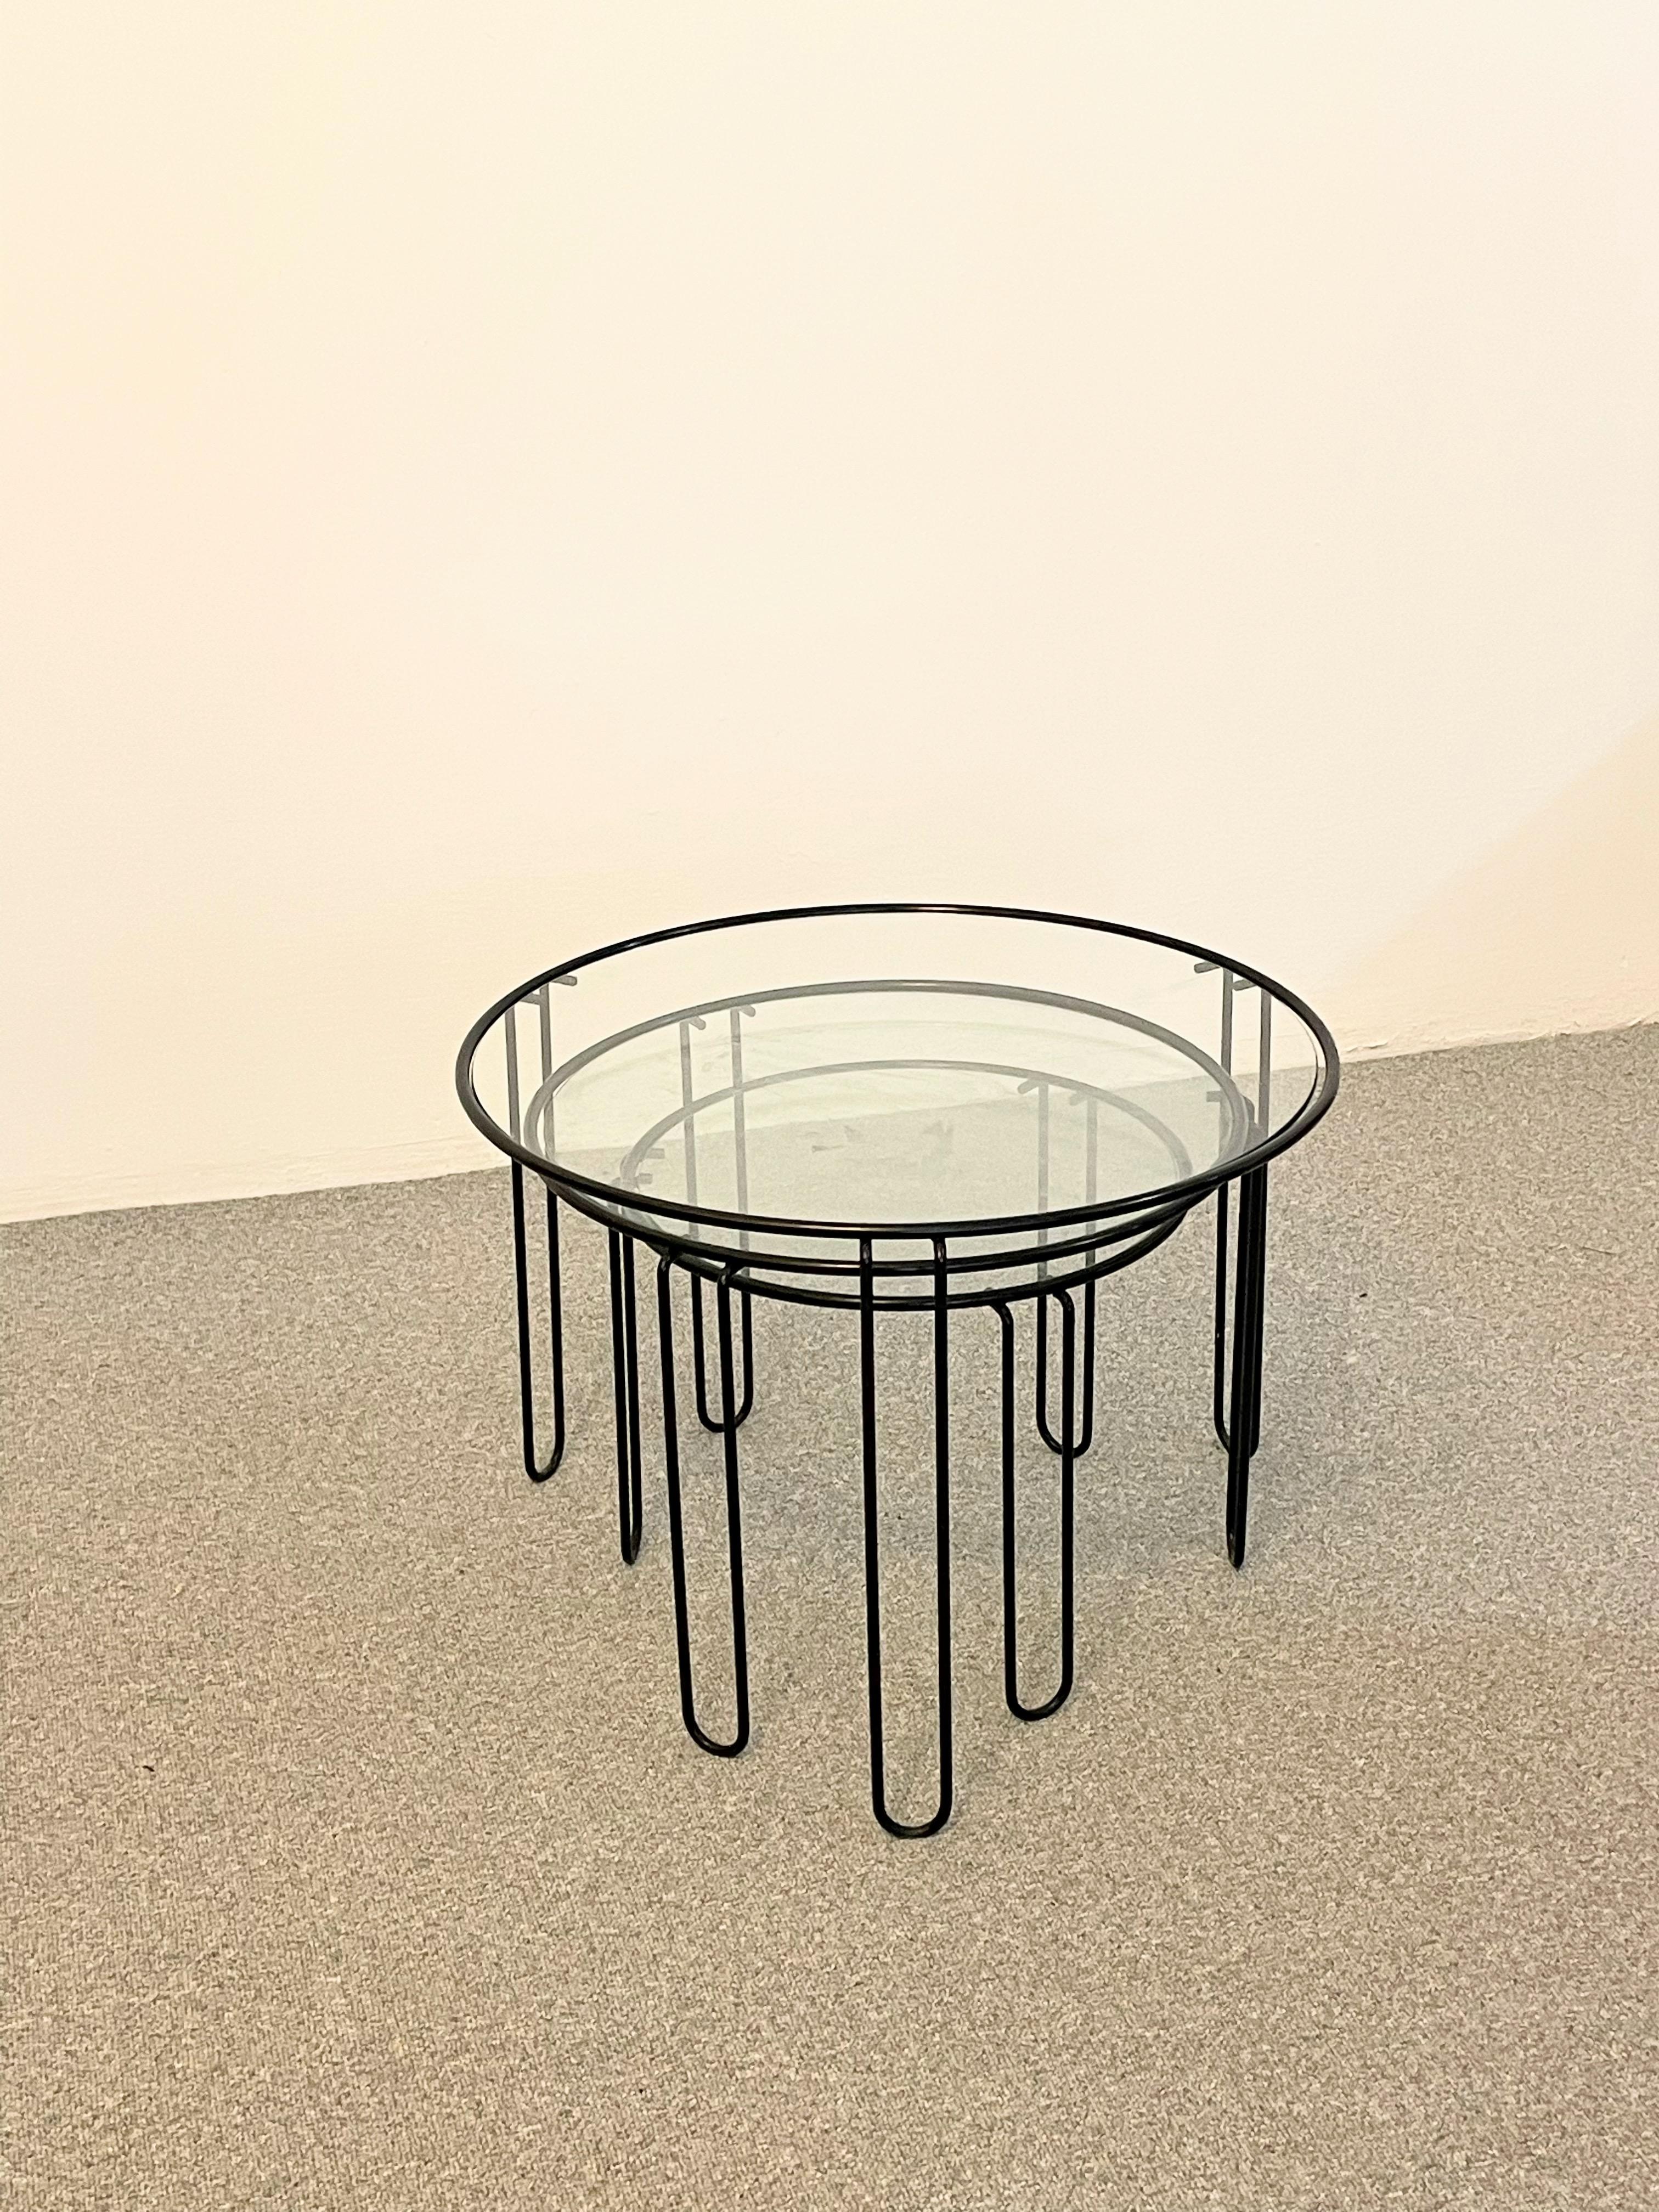 Steel Set of Three Fly Line Round Wire Nesting Tables, Italy, 1970s